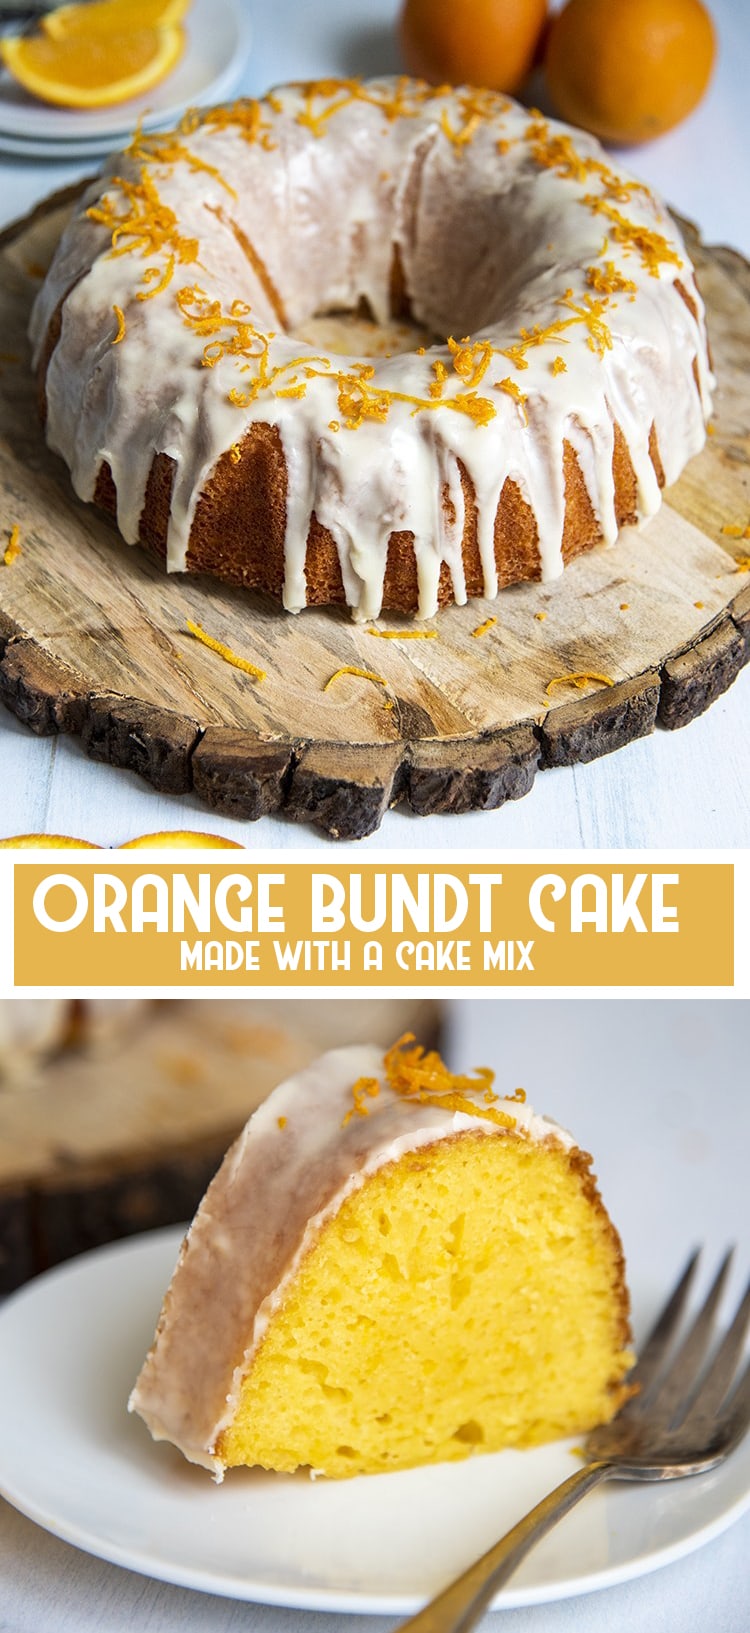 Collage of 2 photos of orange bundt cake made with cake mix with title card of same wording.